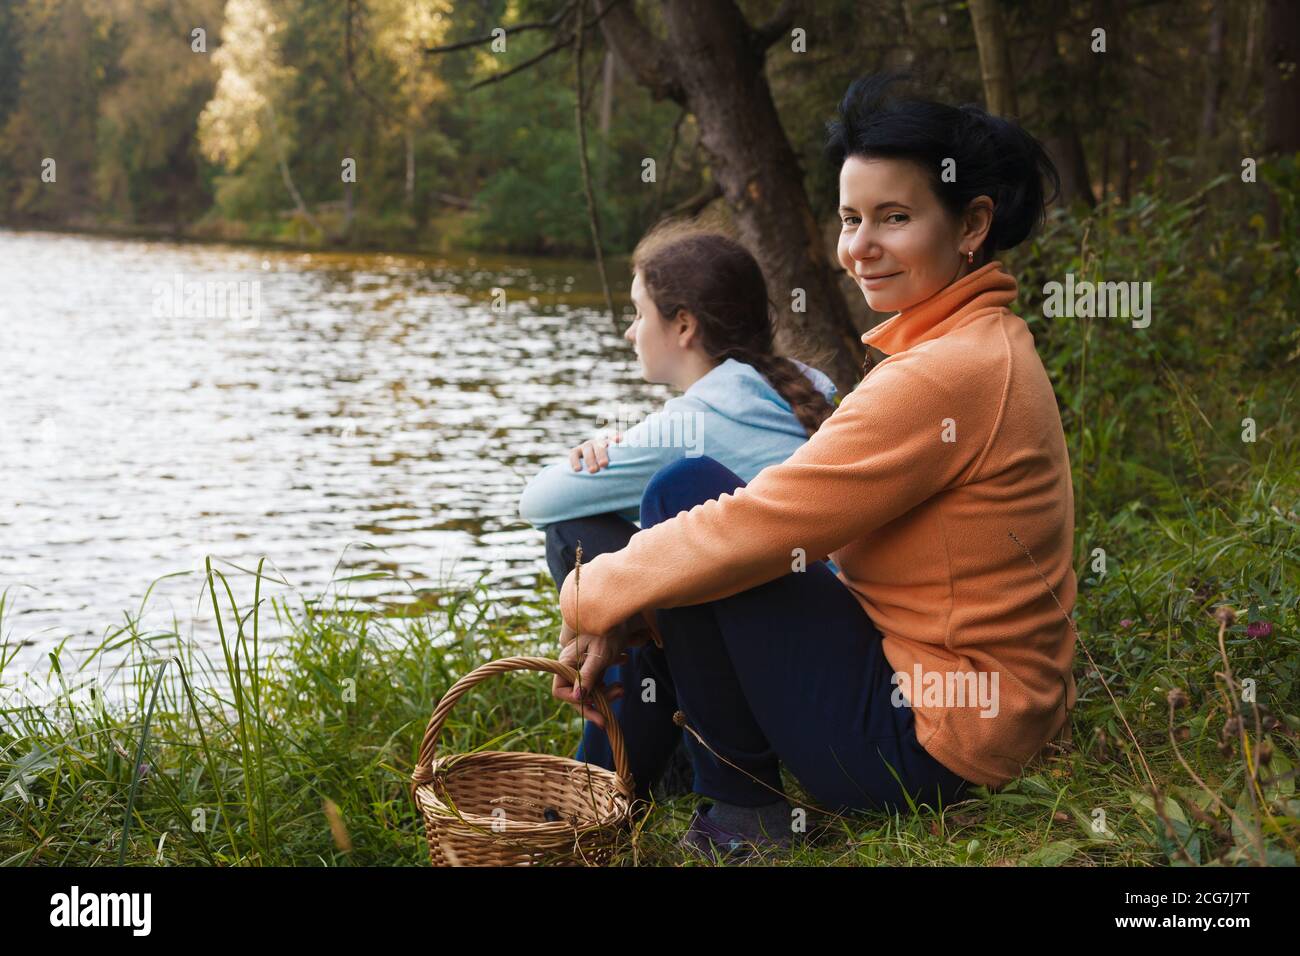 Family picnic during hiking. Mother and daughter sitting on a lake shore in a forest. Family concept. Stock Photo